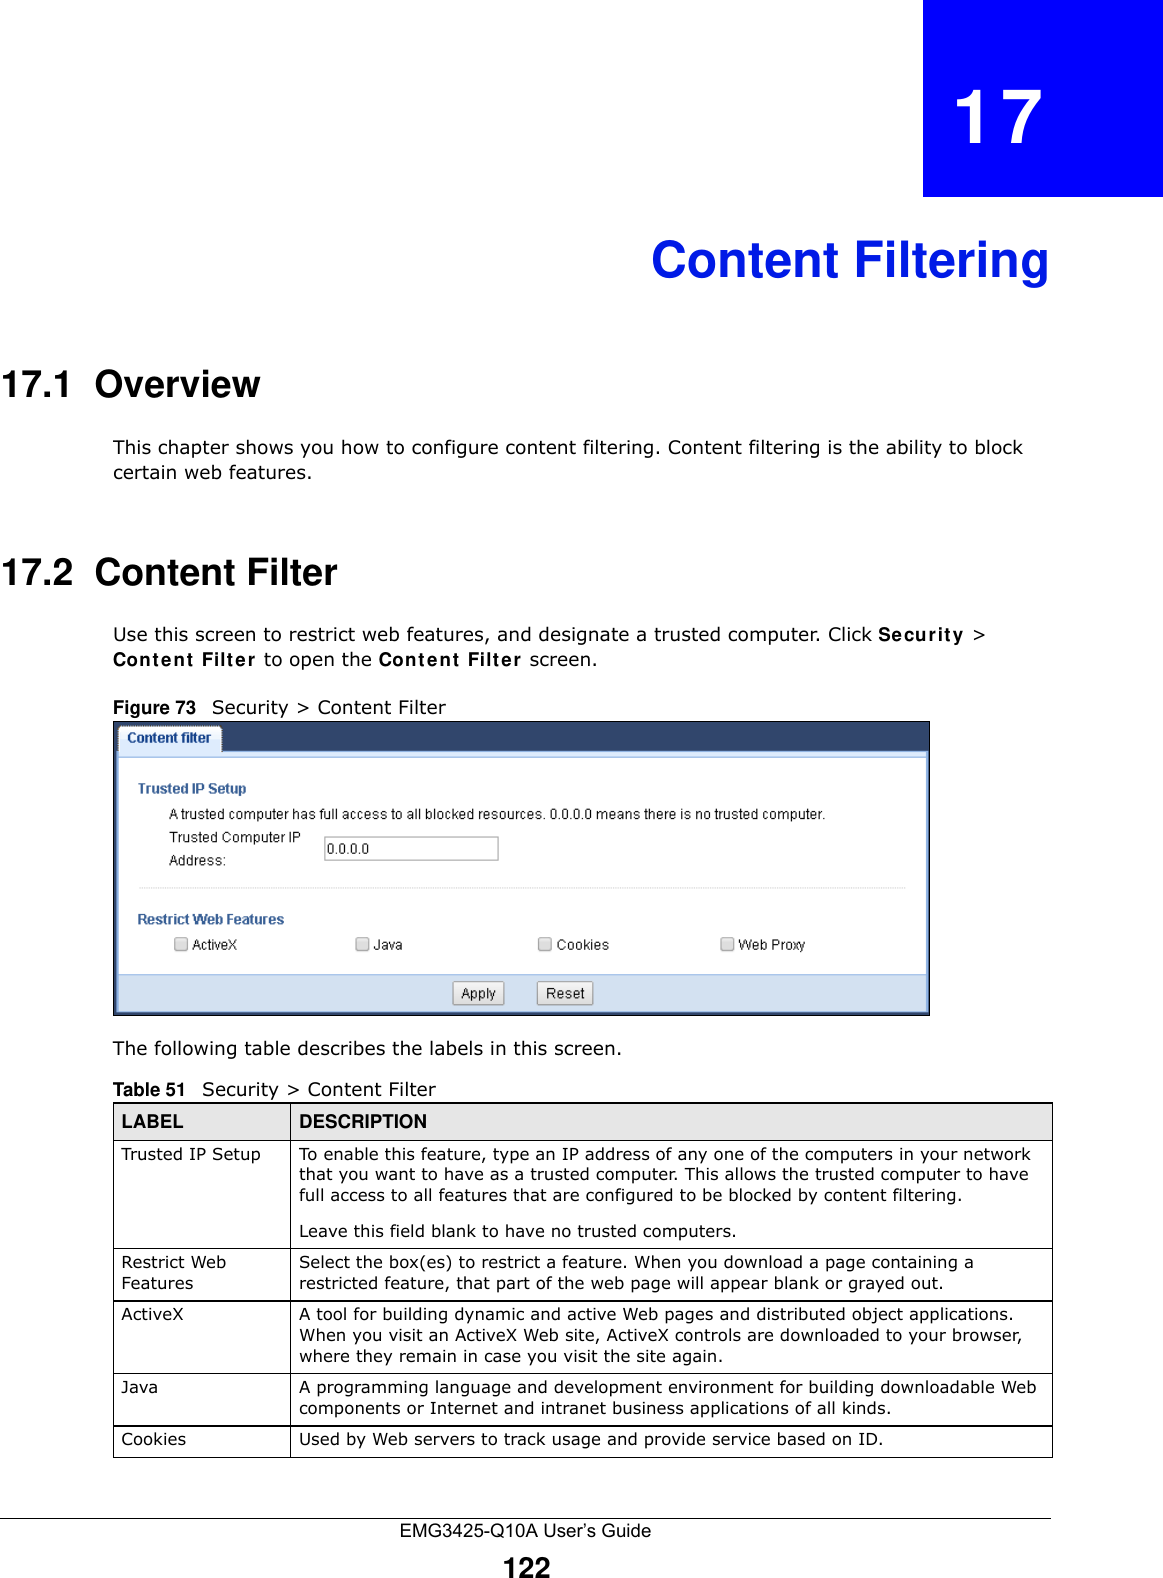 EMG3425-Q10A User’s Guide122CHAPTER   17Content Filtering17.1  OverviewThis chapter shows you how to configure content filtering. Content filtering is the ability to block certain web features.17.2  Content FilterUse this screen to restrict web features, and designate a trusted computer. Click Se curit y &gt; Cont e nt  Filte r  to open the Conte n t  Filter screen. Figure 73   Security &gt; Content Filter The following table describes the labels in this screen.Table 51   Security &gt; Content Filter LABEL DESCRIPTIONTrusted IP Setup To enable this feature, type an IP address of any one of the computers in your network that you want to have as a trusted computer. This allows the trusted computer to have full access to all features that are configured to be blocked by content filtering.Leave this field blank to have no trusted computers.Restrict Web FeaturesSelect the box(es) to restrict a feature. When you download a page containing a restricted feature, that part of the web page will appear blank or grayed out.ActiveX  A tool for building dynamic and active Web pages and distributed object applications. When you visit an ActiveX Web site, ActiveX controls are downloaded to your browser, where they remain in case you visit the site again. Java A programming language and development environment for building downloadable Web components or Internet and intranet business applications of all kinds.Cookies Used by Web servers to track usage and provide service based on ID. 